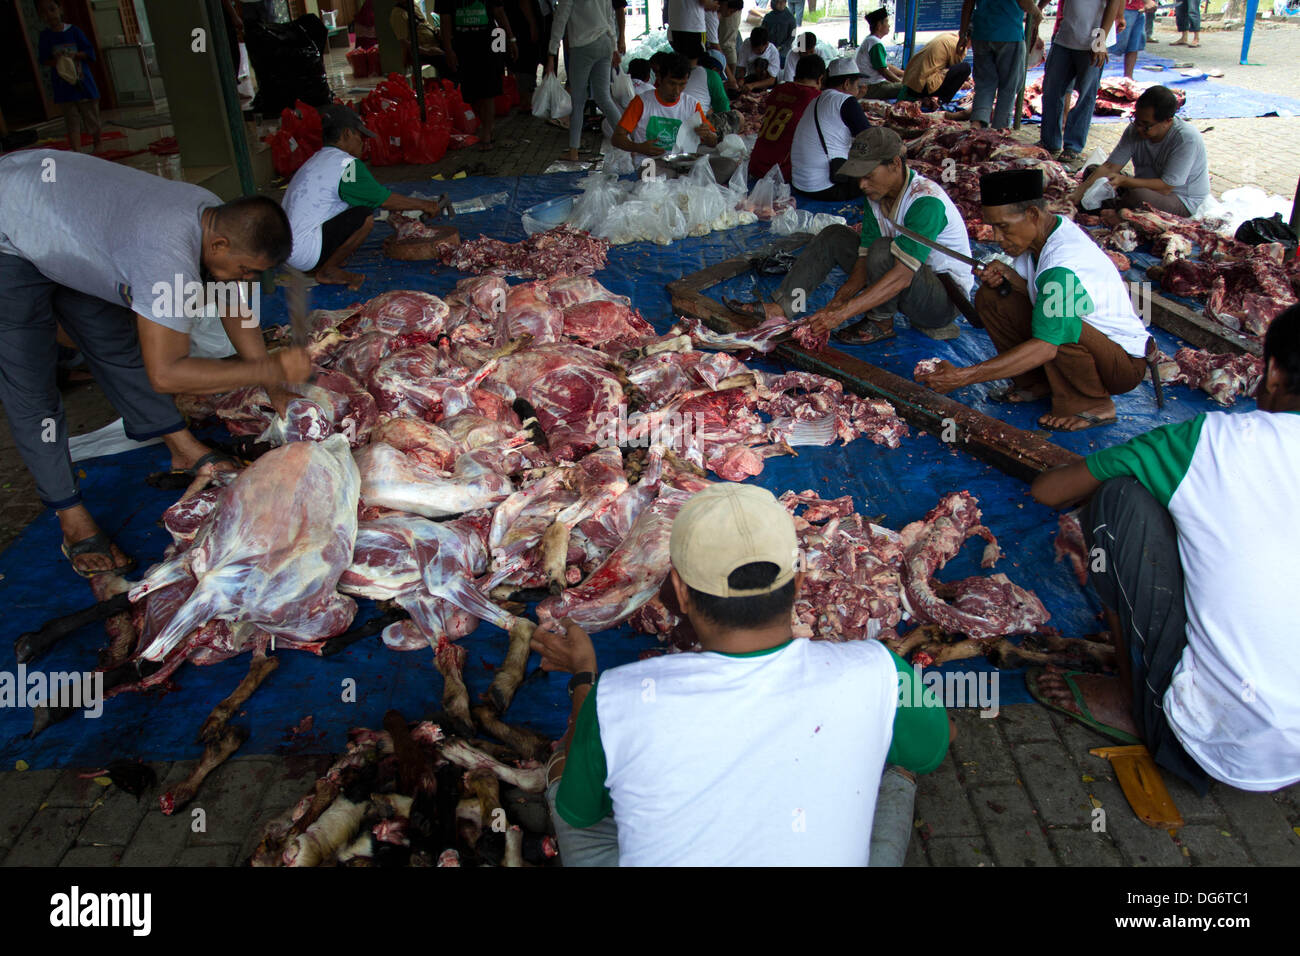 Serpong-Banten, Indonesia. 15th October 2013. A Cow meat divided into pieces. Muslims in Indonesia celebrate Iedul Adha by slaughtering cows or sheep to give to the poor.  Credit:  Donal Husni/Alamy Live News Stock Photo